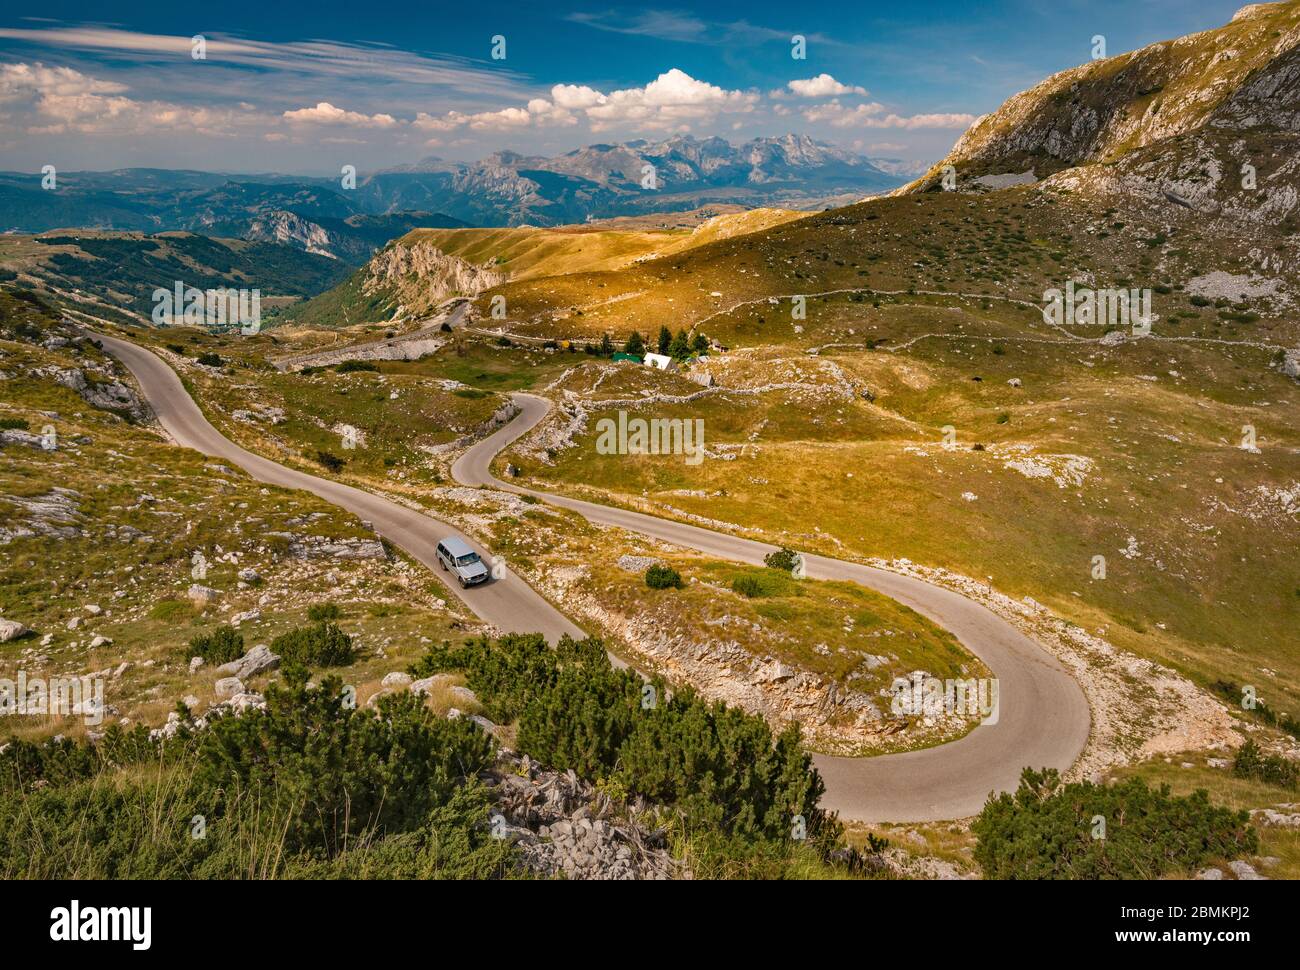 Hairpin bends at road, Piva Plateau near Durmitor National Park, Dinaric Alps, Montenegro, Southeastern Europe Stock Photo